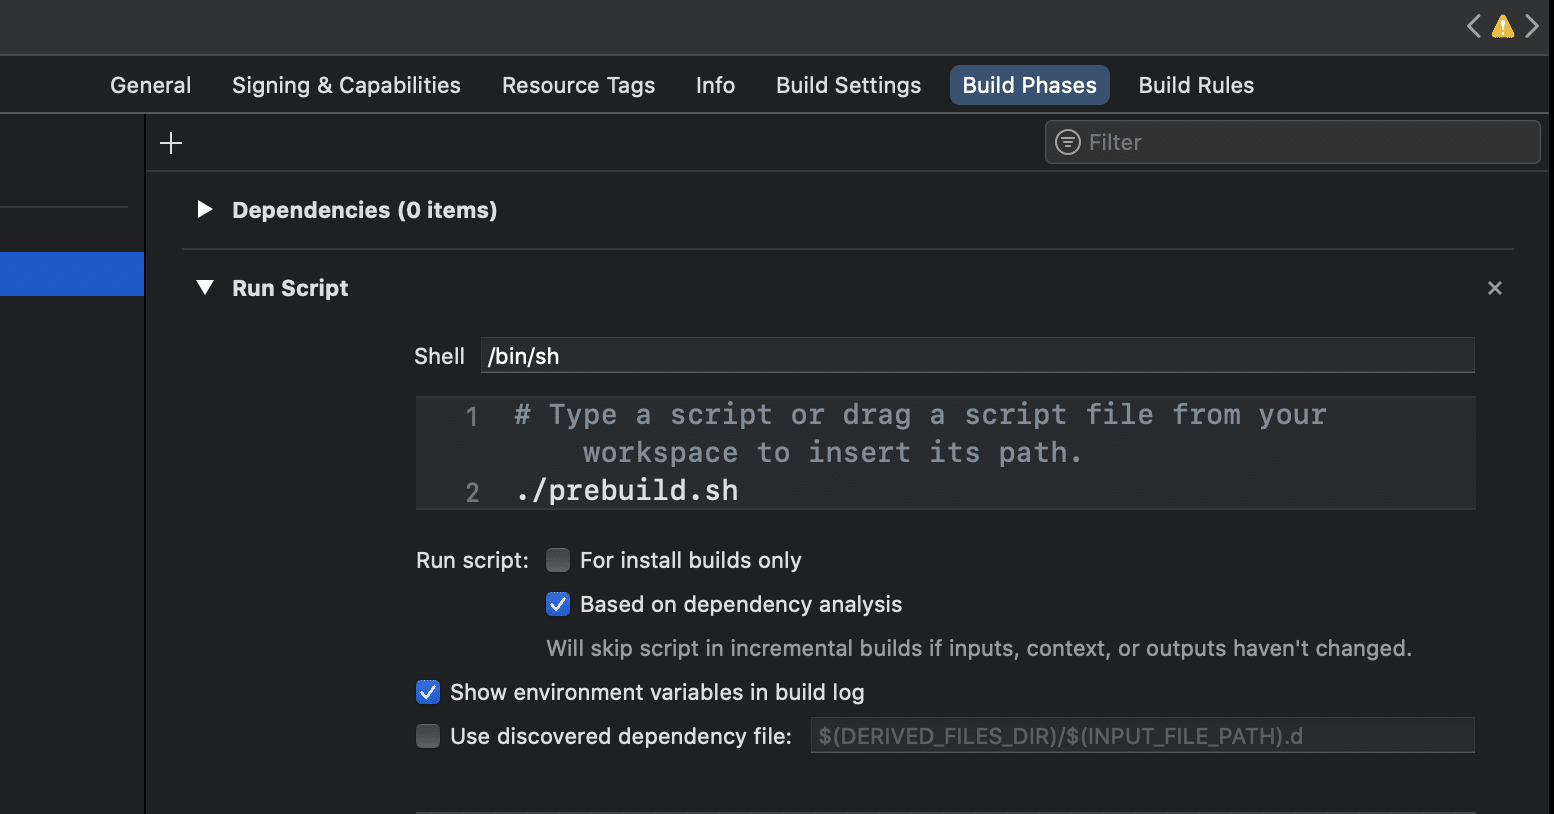 Add a run script step to the build phase in Xcode.